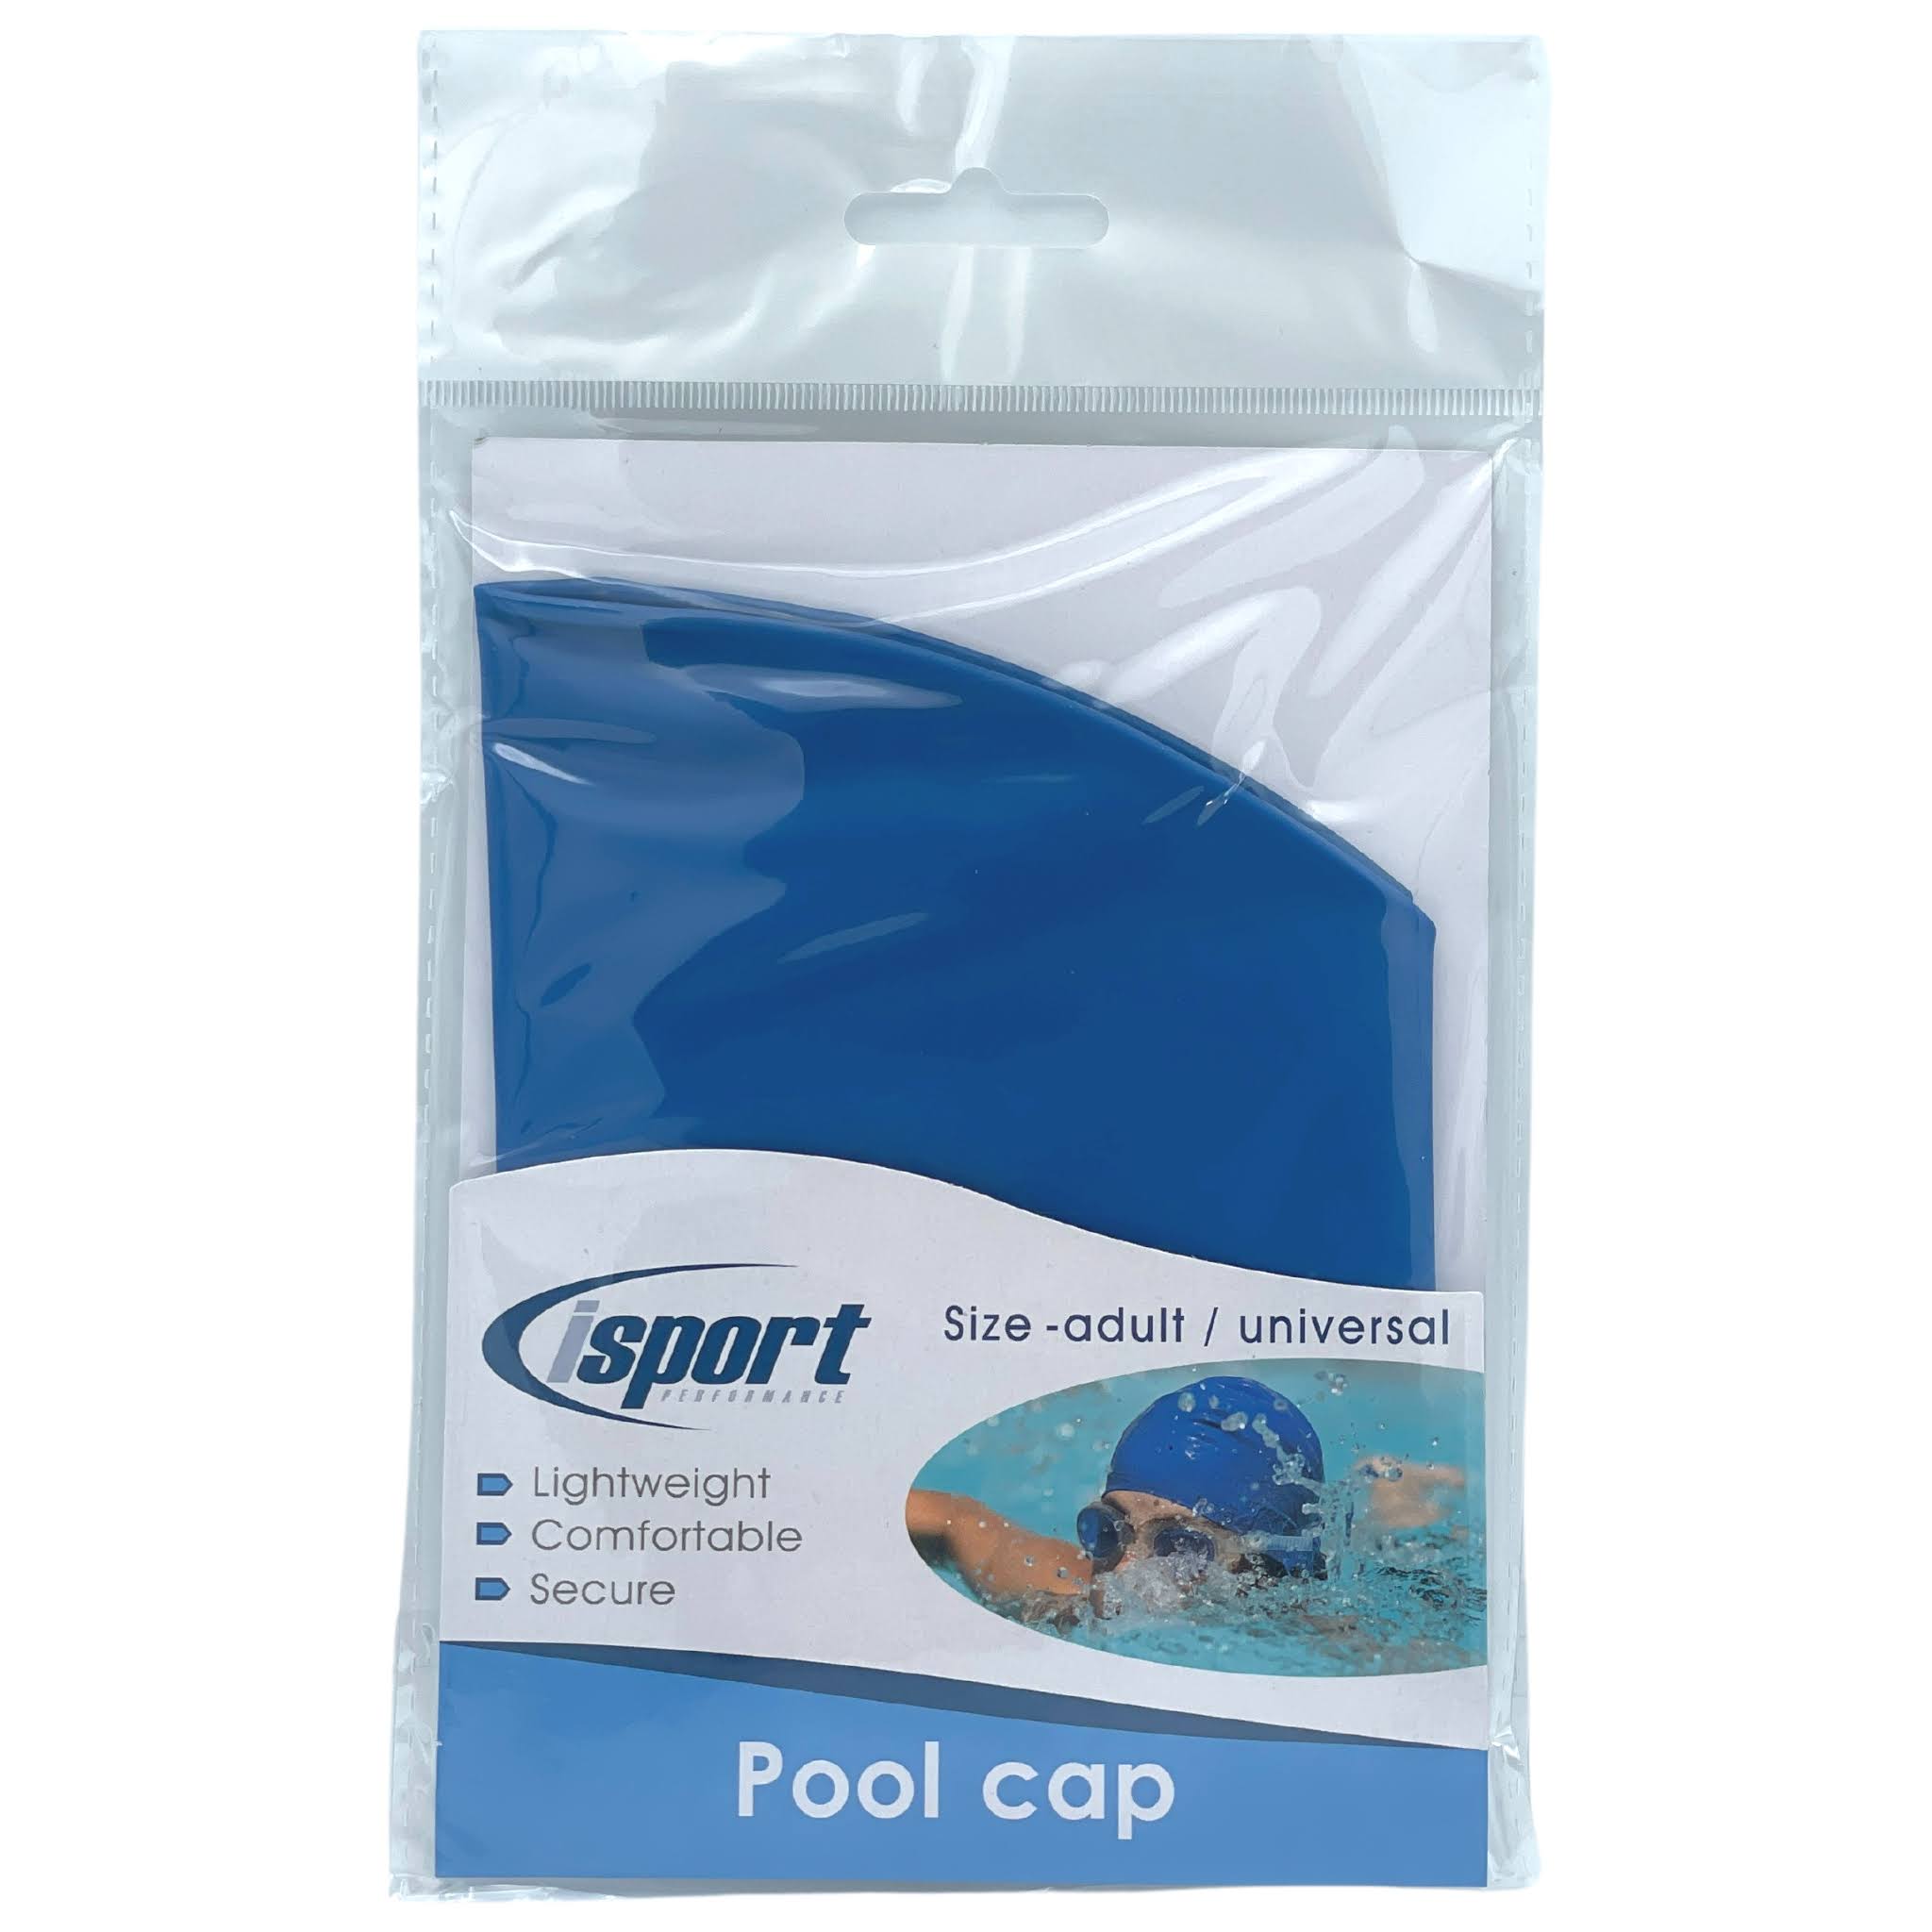 (adult) - Isport Lightweight Pool Cap in Assorted Colours (Colour May Vary) - Adult